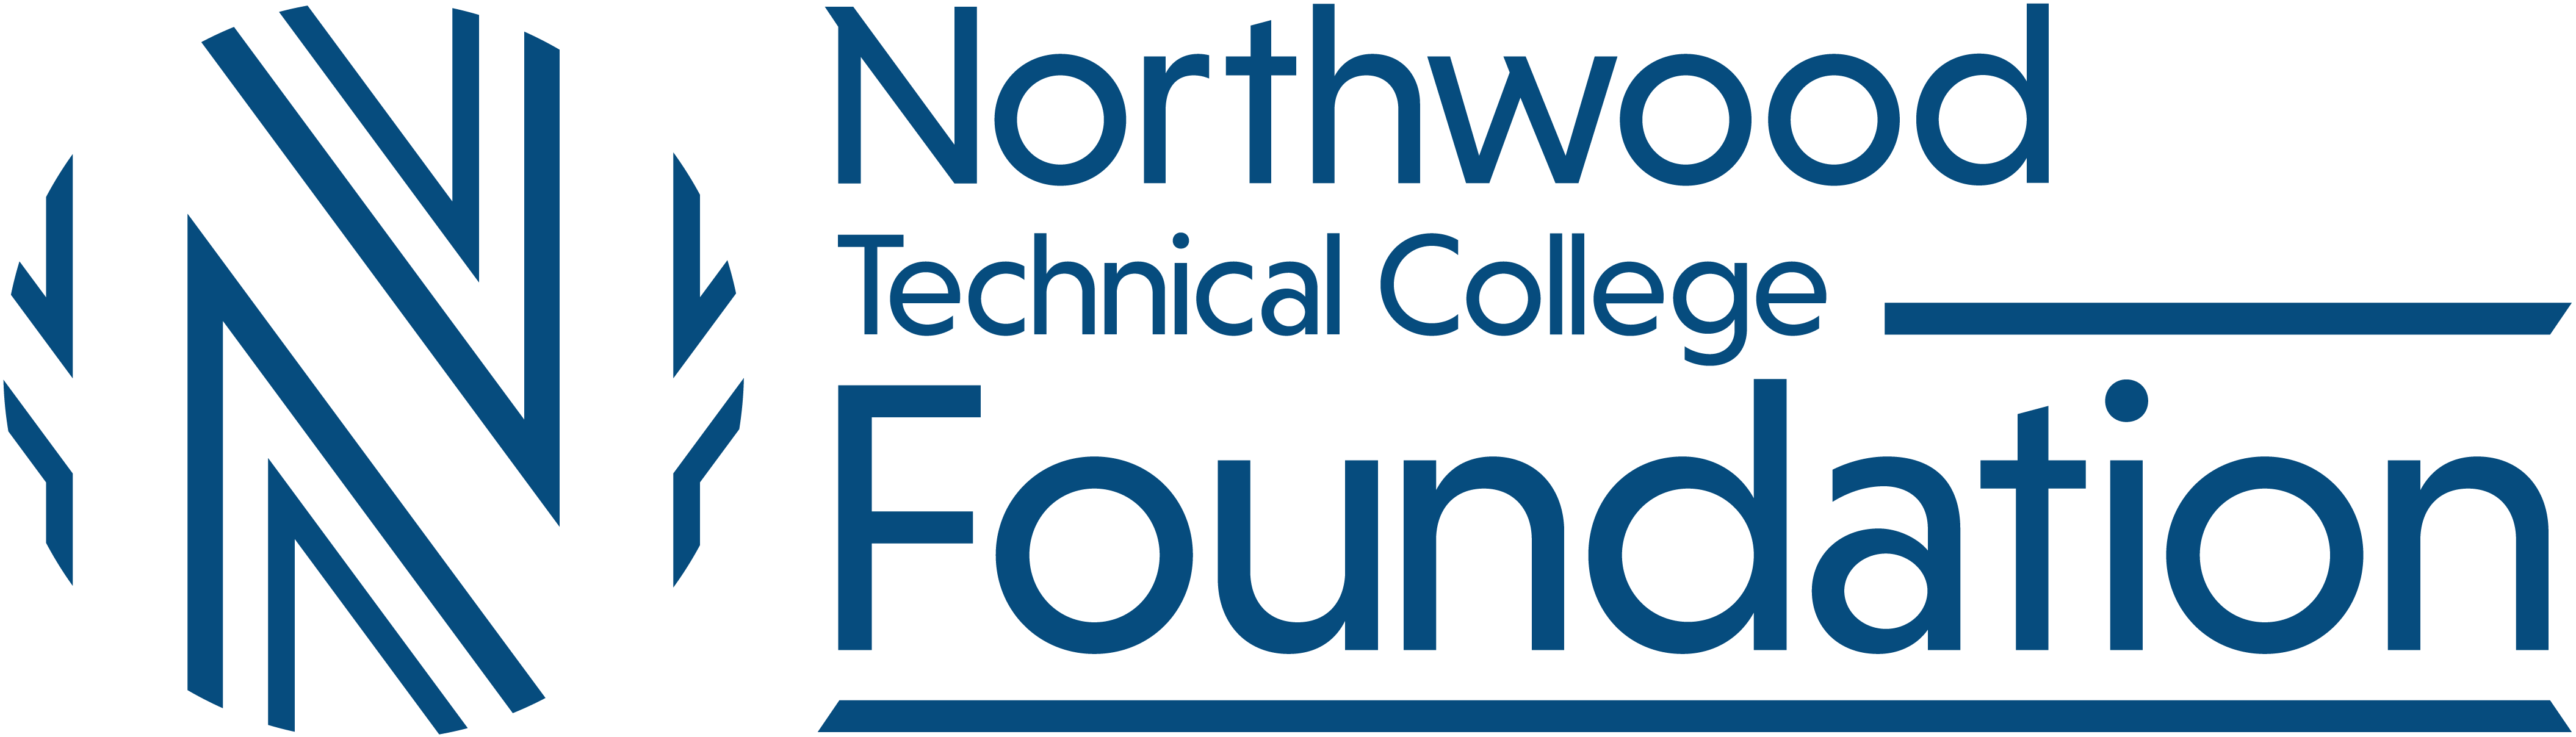 Northwood Technical College Foundation